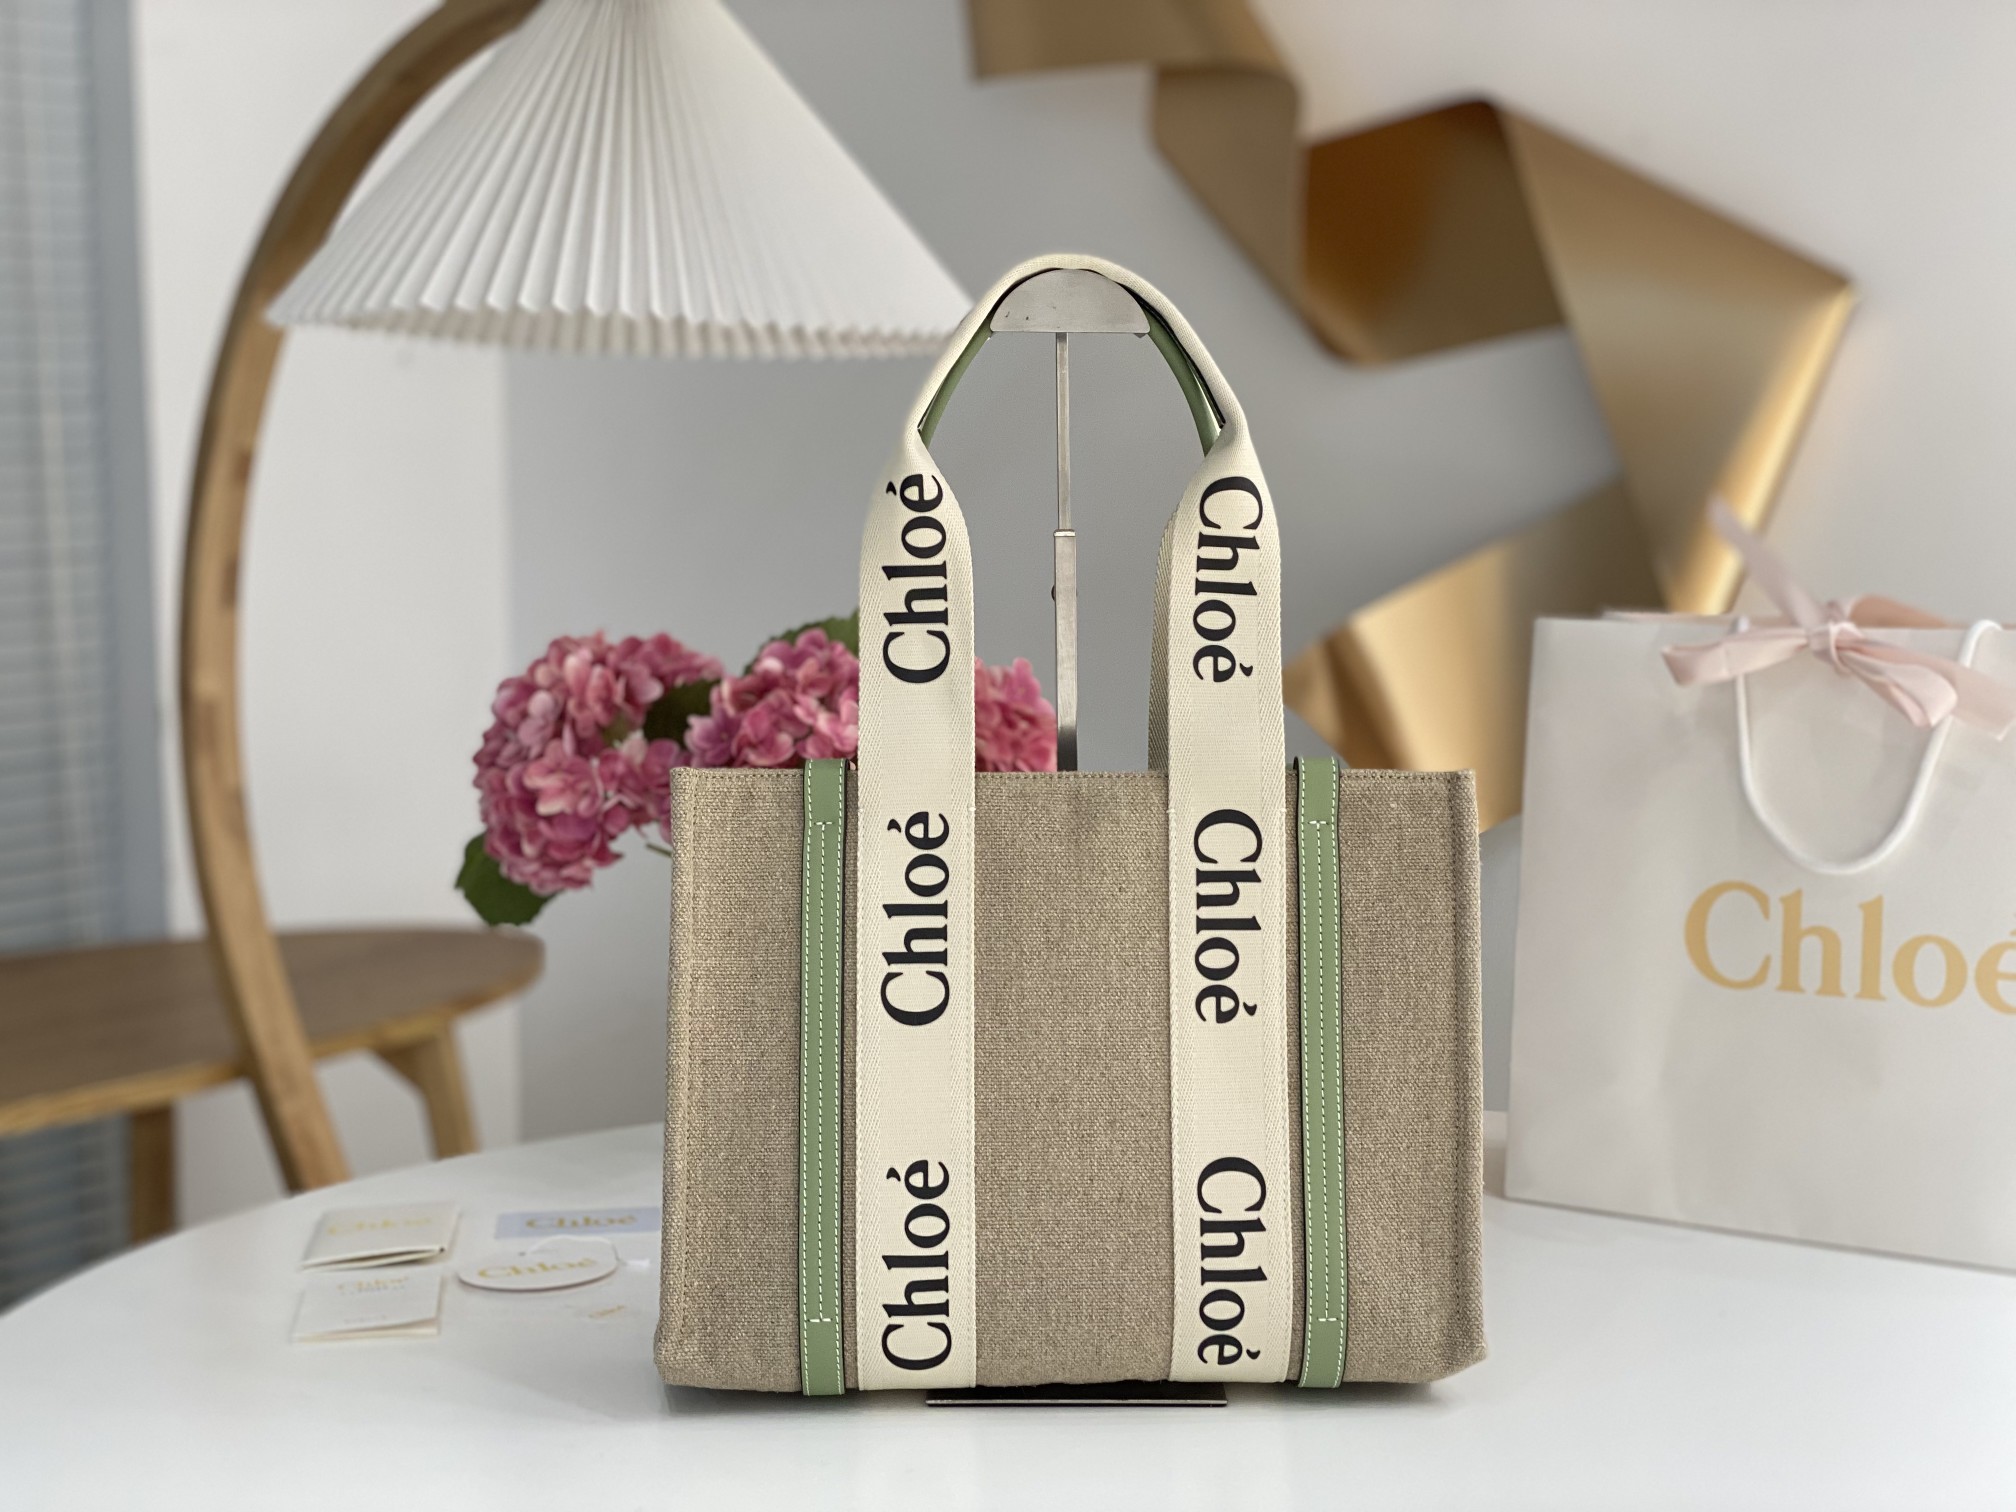 Chloe Handbags Tote Bags Best Quality Fake
 Apricot Color Black Green White Canvas Cotton Linen Woody Casual